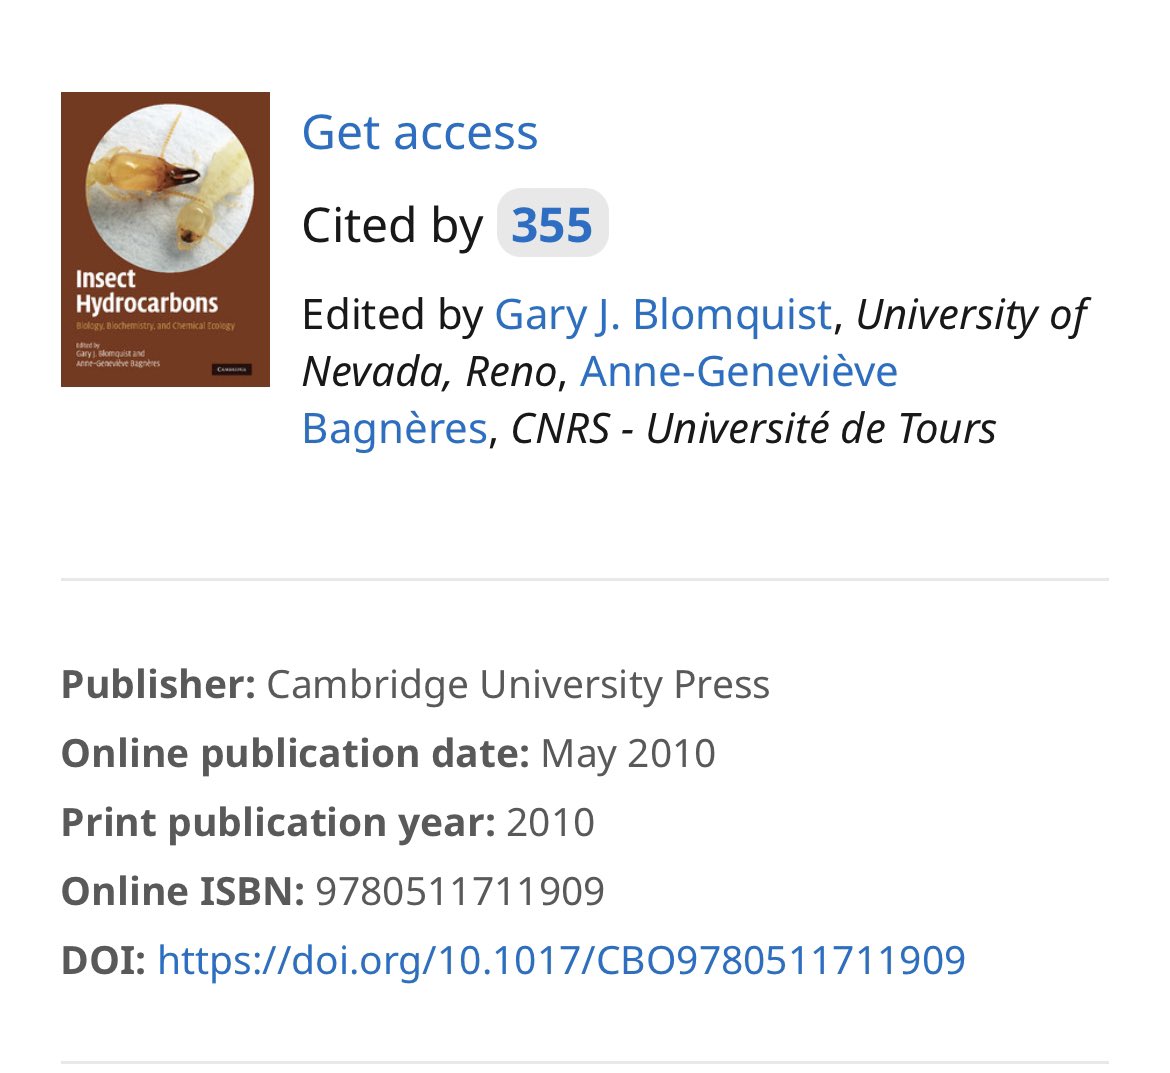 @ChemEcol_org @AhdUniv Almost 12 years ago wrote a book chapter with Prof. Allen Gibbs (University of Nevada). Today met one of the Editor’s of the book Dr. Anne-Geneviève Bagnères, CNRS - Université de Tours (during 38th Annual Meeting of ISCE 2023)